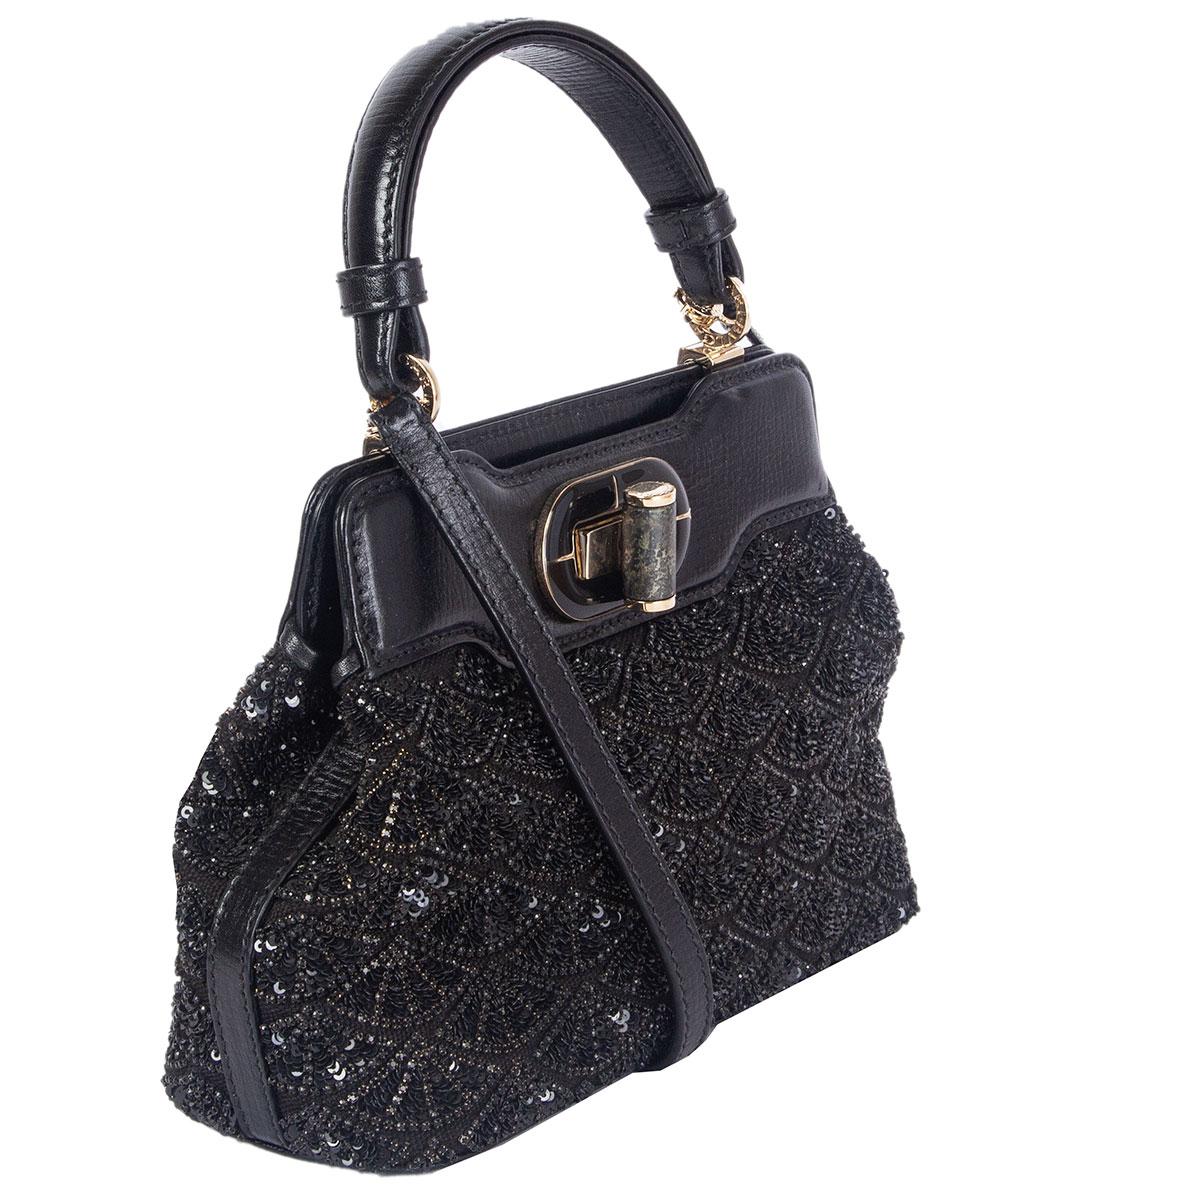 100% authentic Bulgari Isabella Rossellini XS handbag in black canvas and leather embellished with black sequins. Opens with a turn-lock and is lined in black satin with one zipper pocket against the back. Comes with a detachable and adjustable